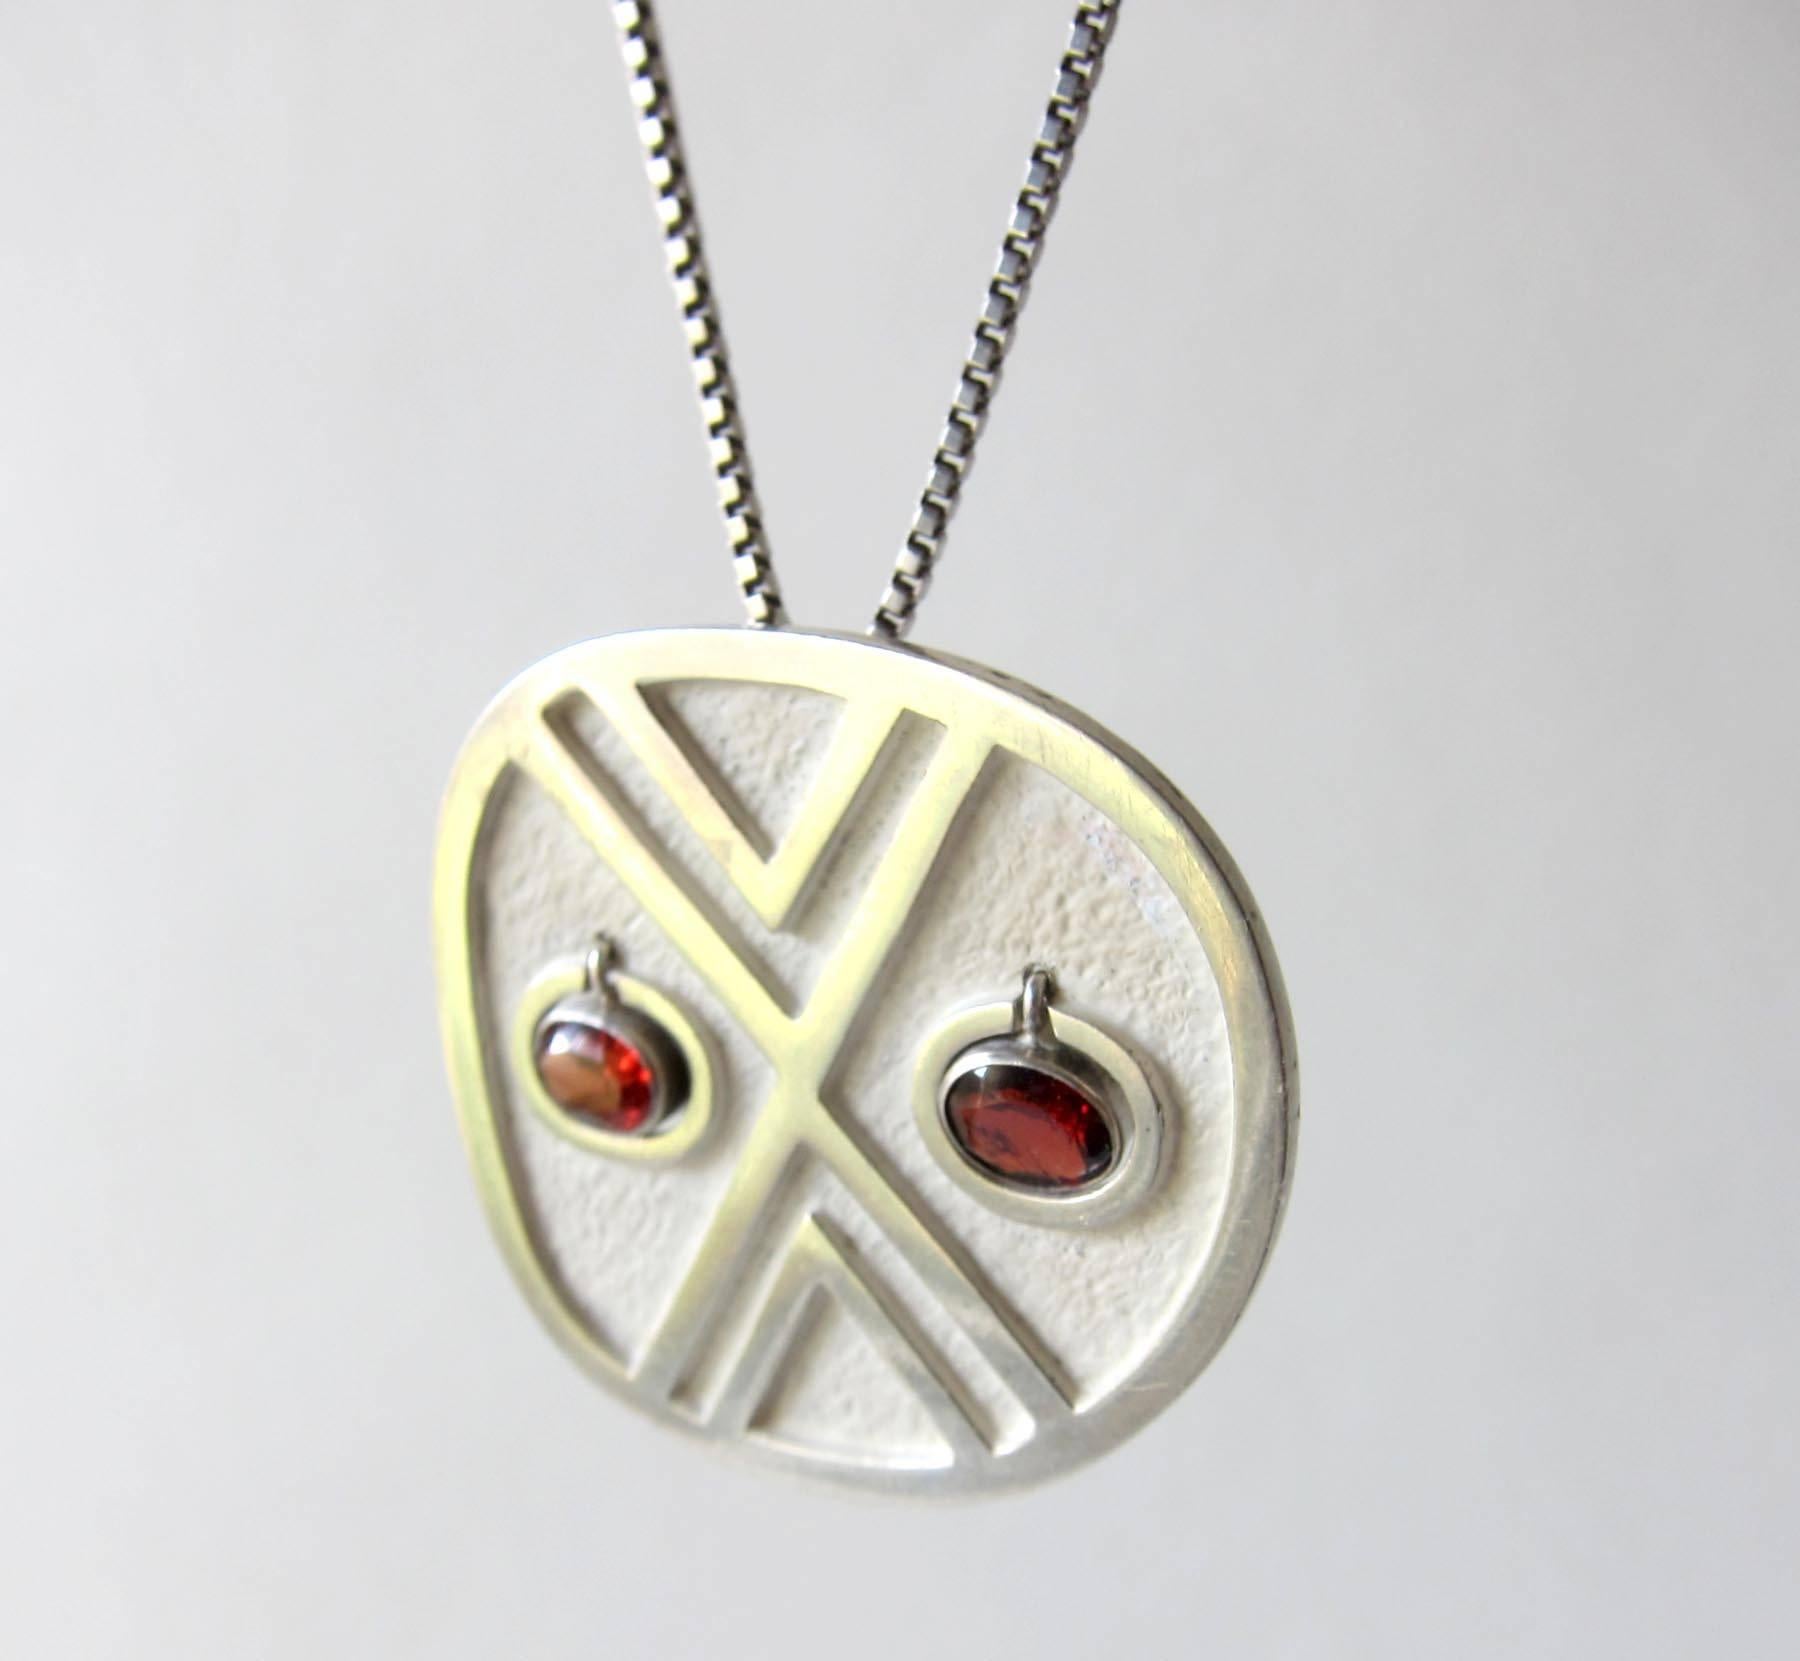 Silver pendant necklace with kinetic, hanging garnet eyes created by Oswaldo Guayasamin of Ecuador.  Pendant measures 1.5